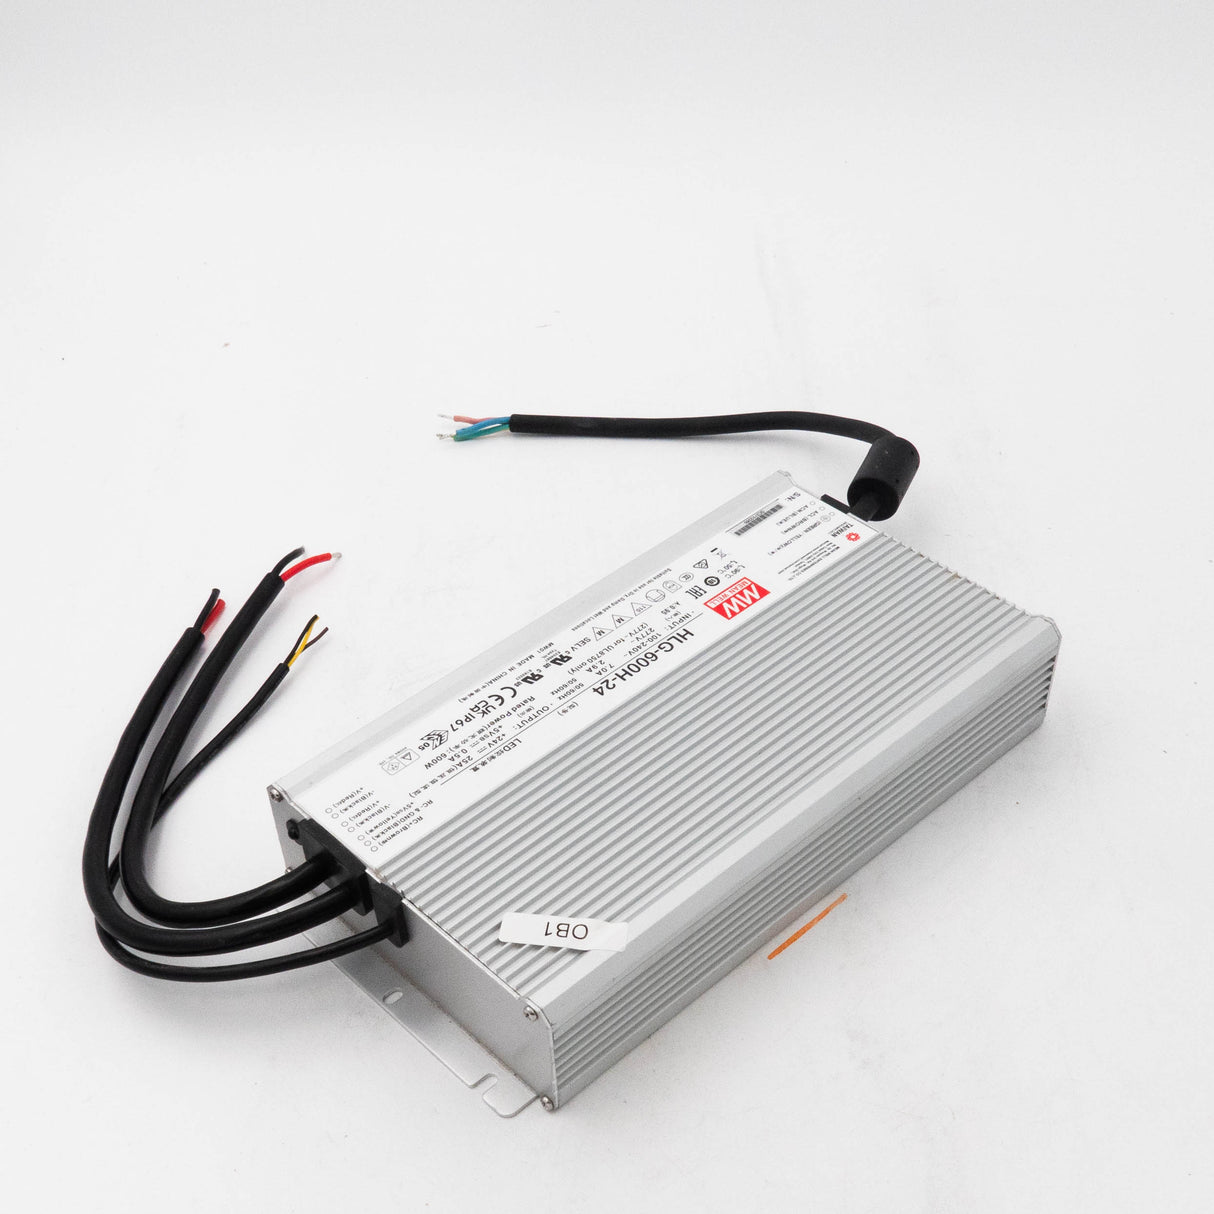 Mean Well HLG-600H-24 Power Supply 600W 24V - Open Box